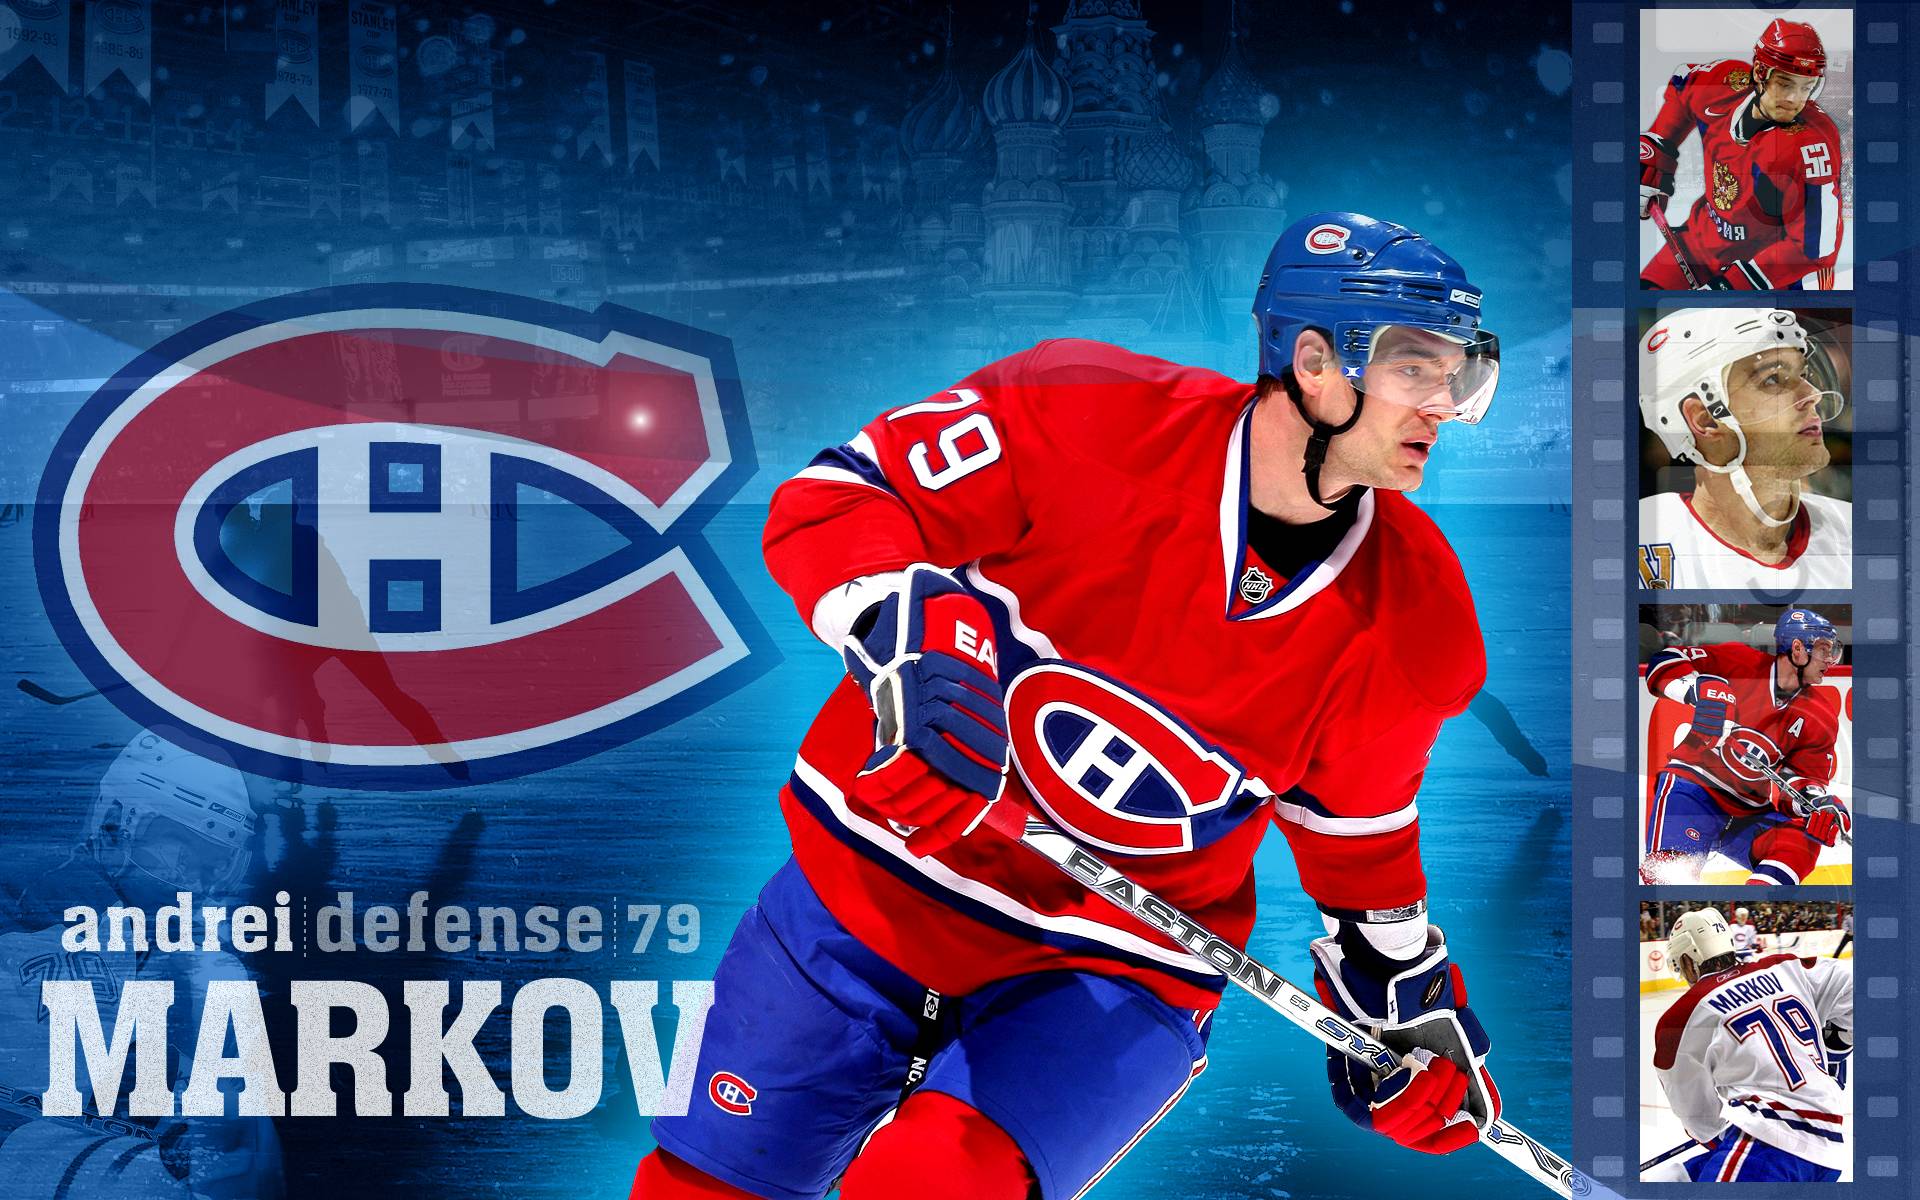 Outstanding Montreal Canadiens wallpaper. Montreal Canadiens